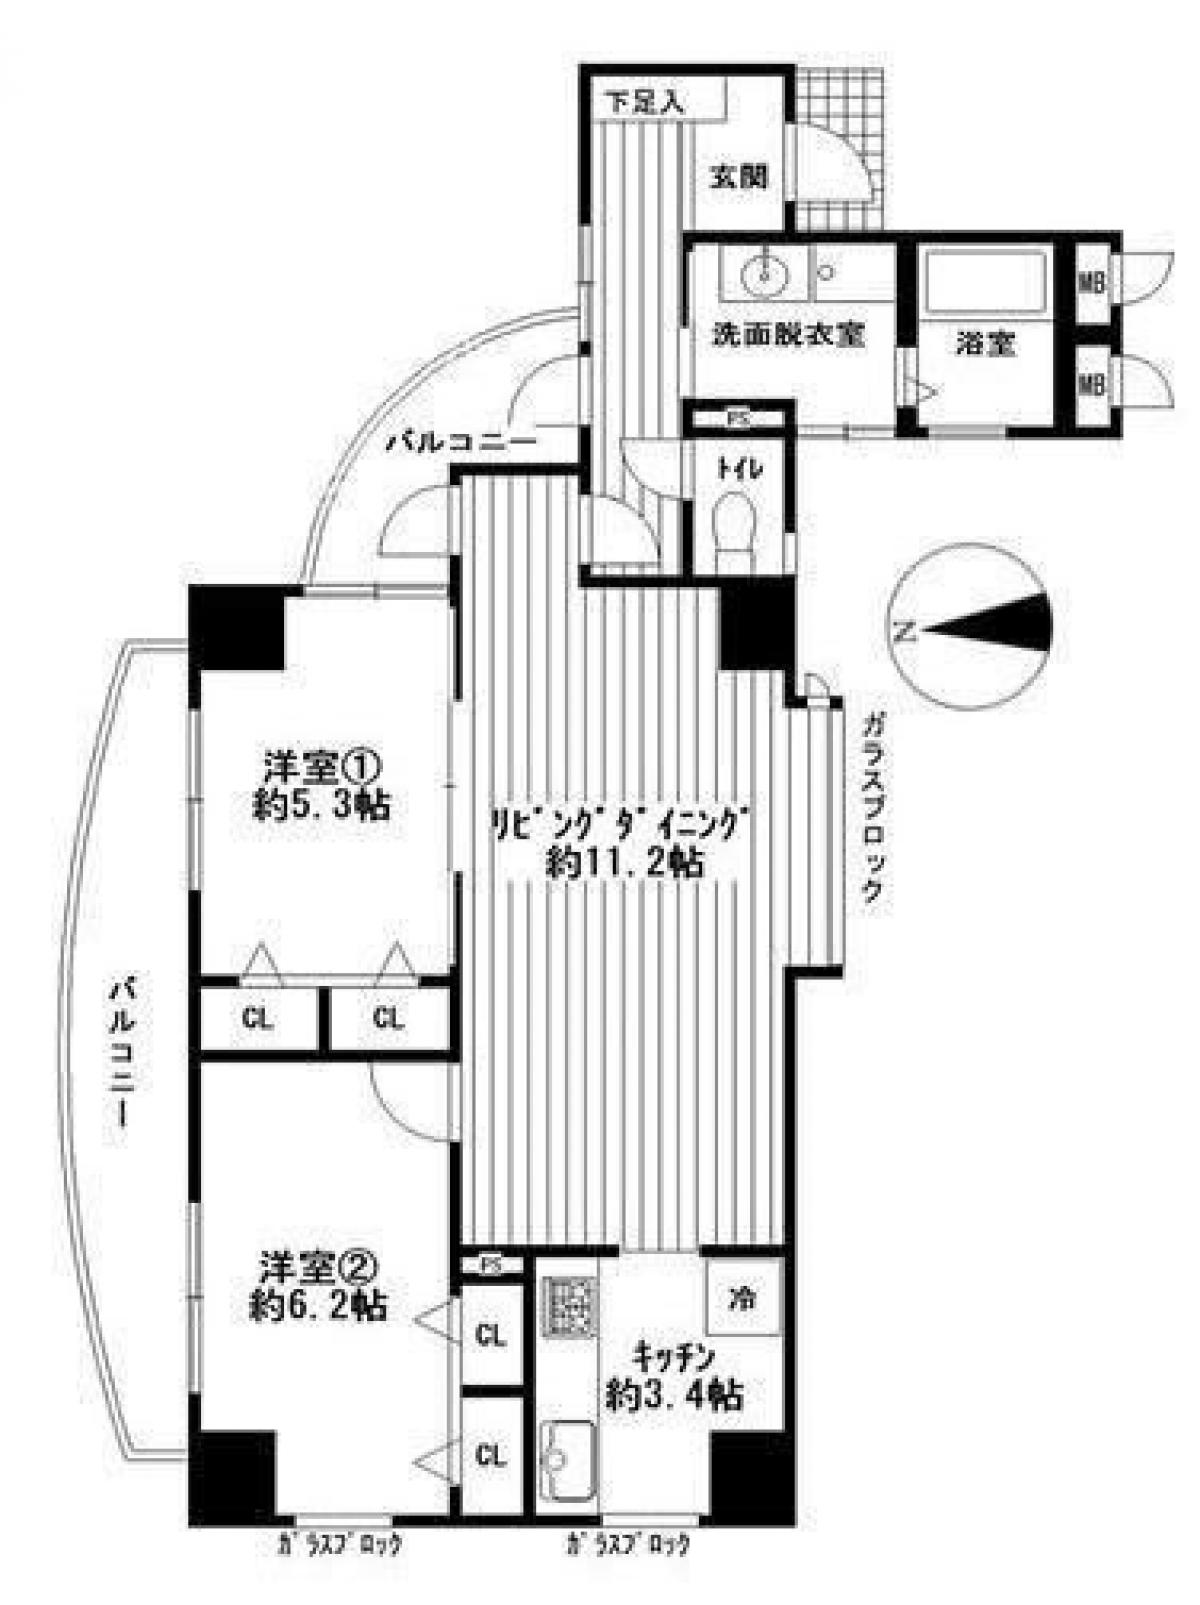 Picture of Apartment For Sale in Kashihara Shi, Nara, Japan